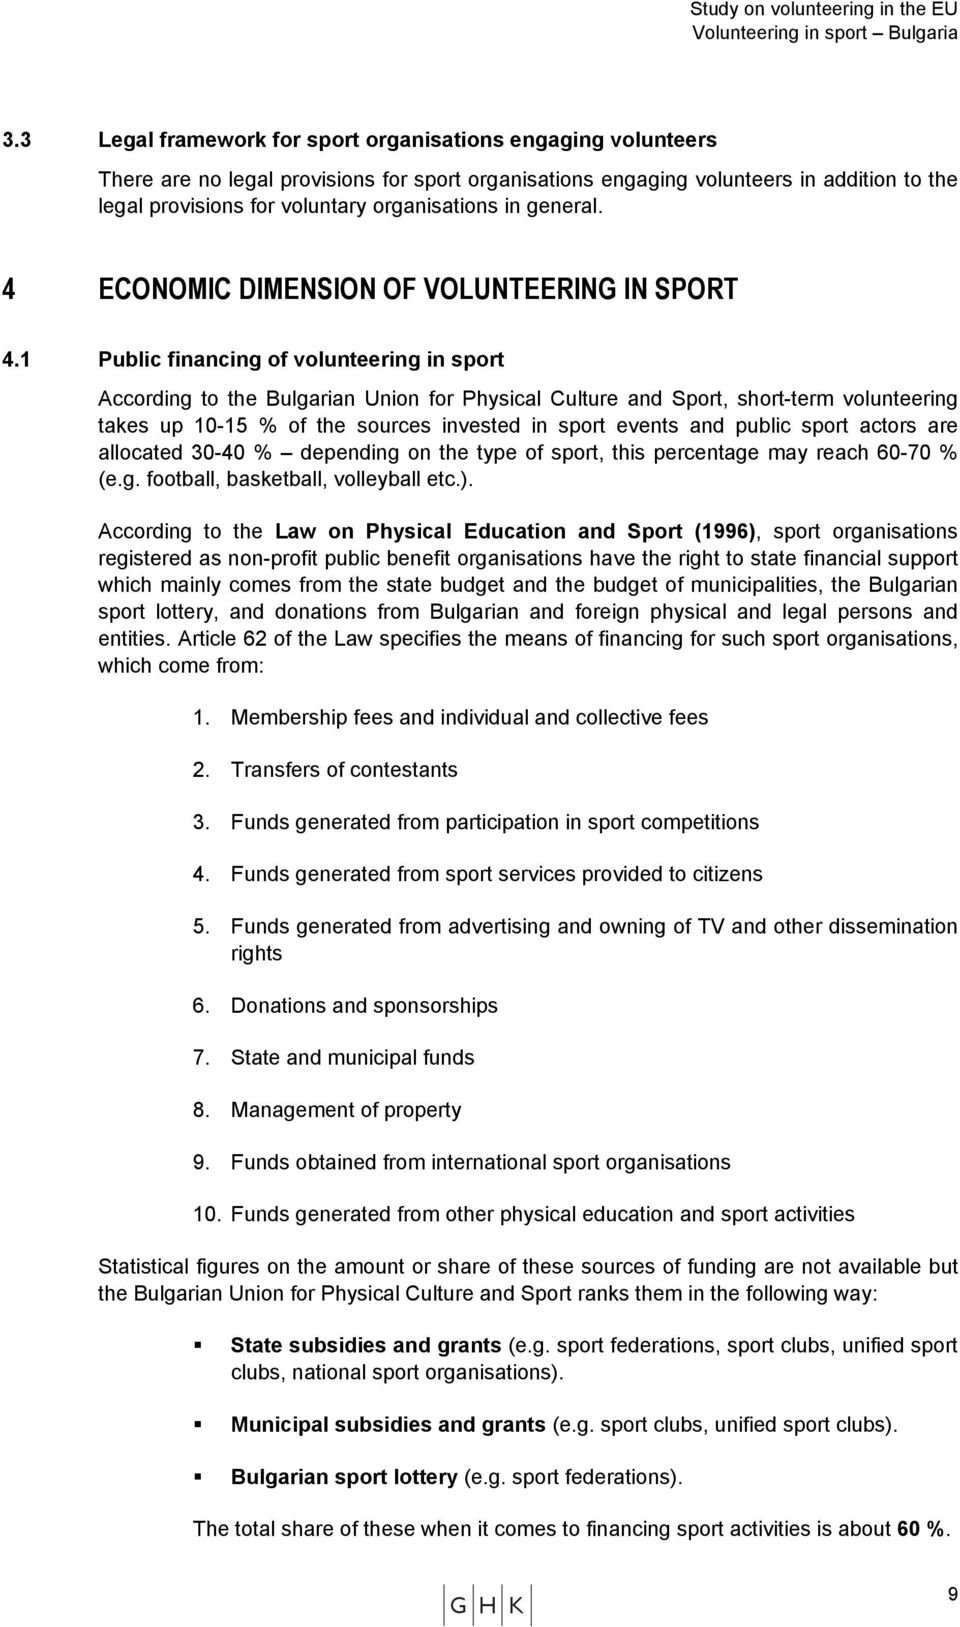 1 Public financing of volunteering in sport According to the Bulgarian Union for Physical Culture and Sport, short-term volunteering takes up 10-15 % of the sources invested in sport events and